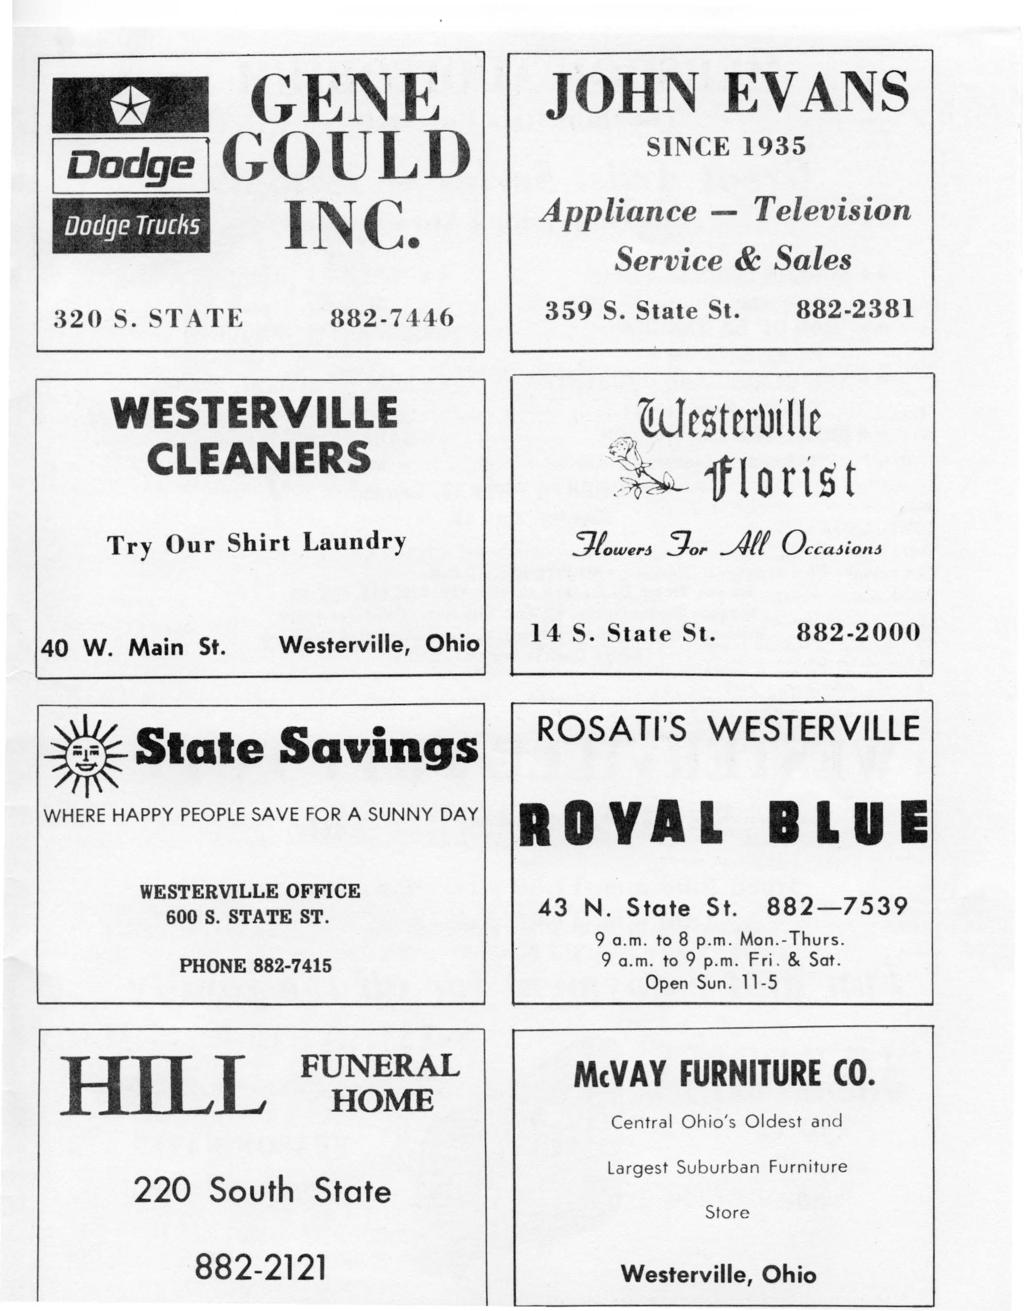 GENE jdaclge jgould Dodge True/is INC. 3 2 0 S. STATE 882-7 446 WESTERVILLE CLEANERS Try Our Shirt Laundry JOHN EVANS SINCE 1935 Appliance - Television Service & Sales 359 S. State St.